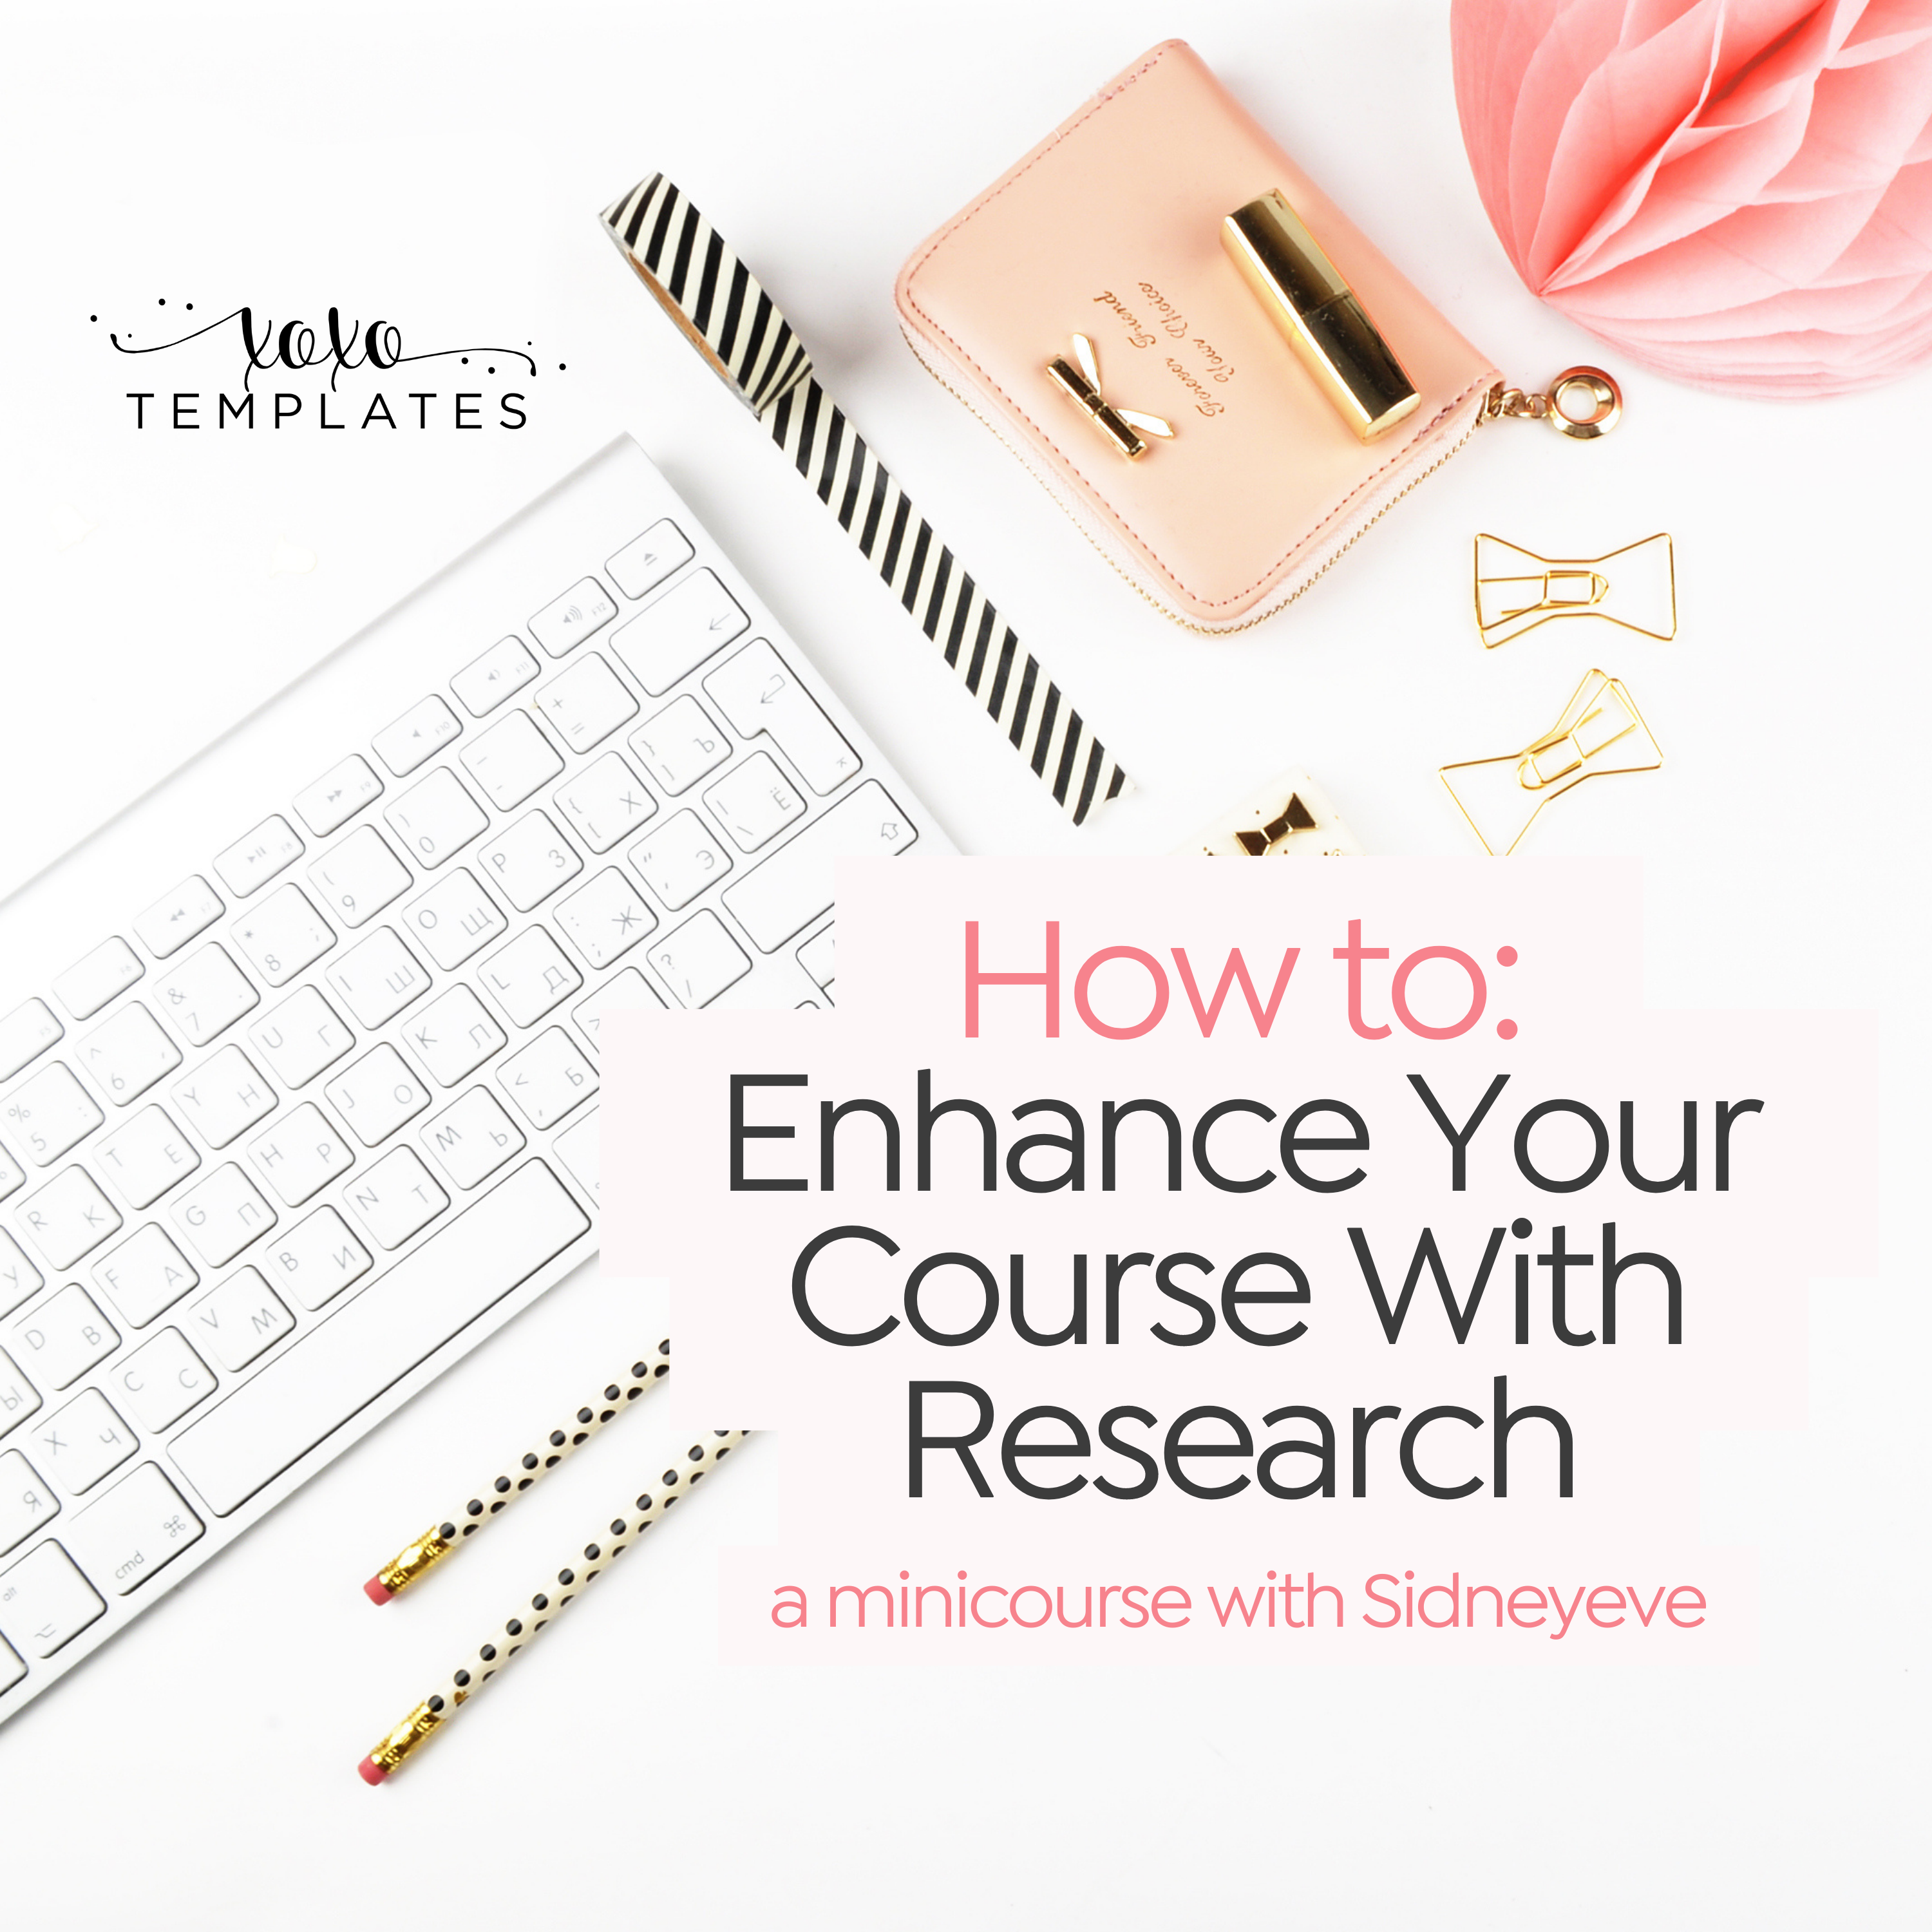 Enhance Your Course with Research Workshop